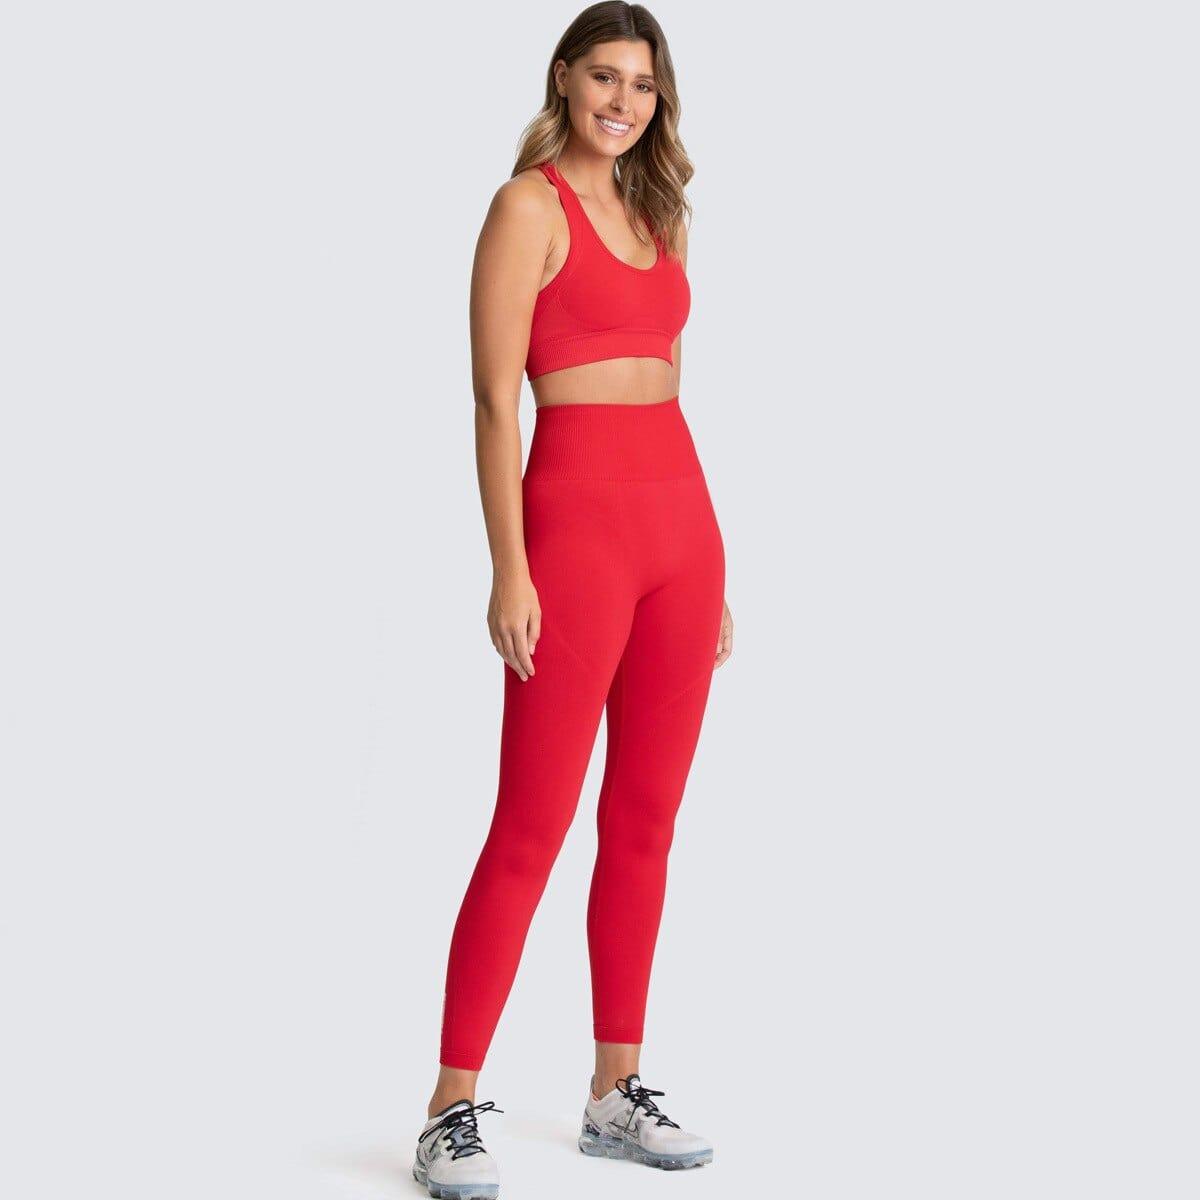 Shop 0 red suit / S Two Piece Set Women Sportswear Workout Clothes for Women Sport Sets Suits For Fitness Long Sleeve Seamless Yoga Set Leggings Mademoiselle Home Decor